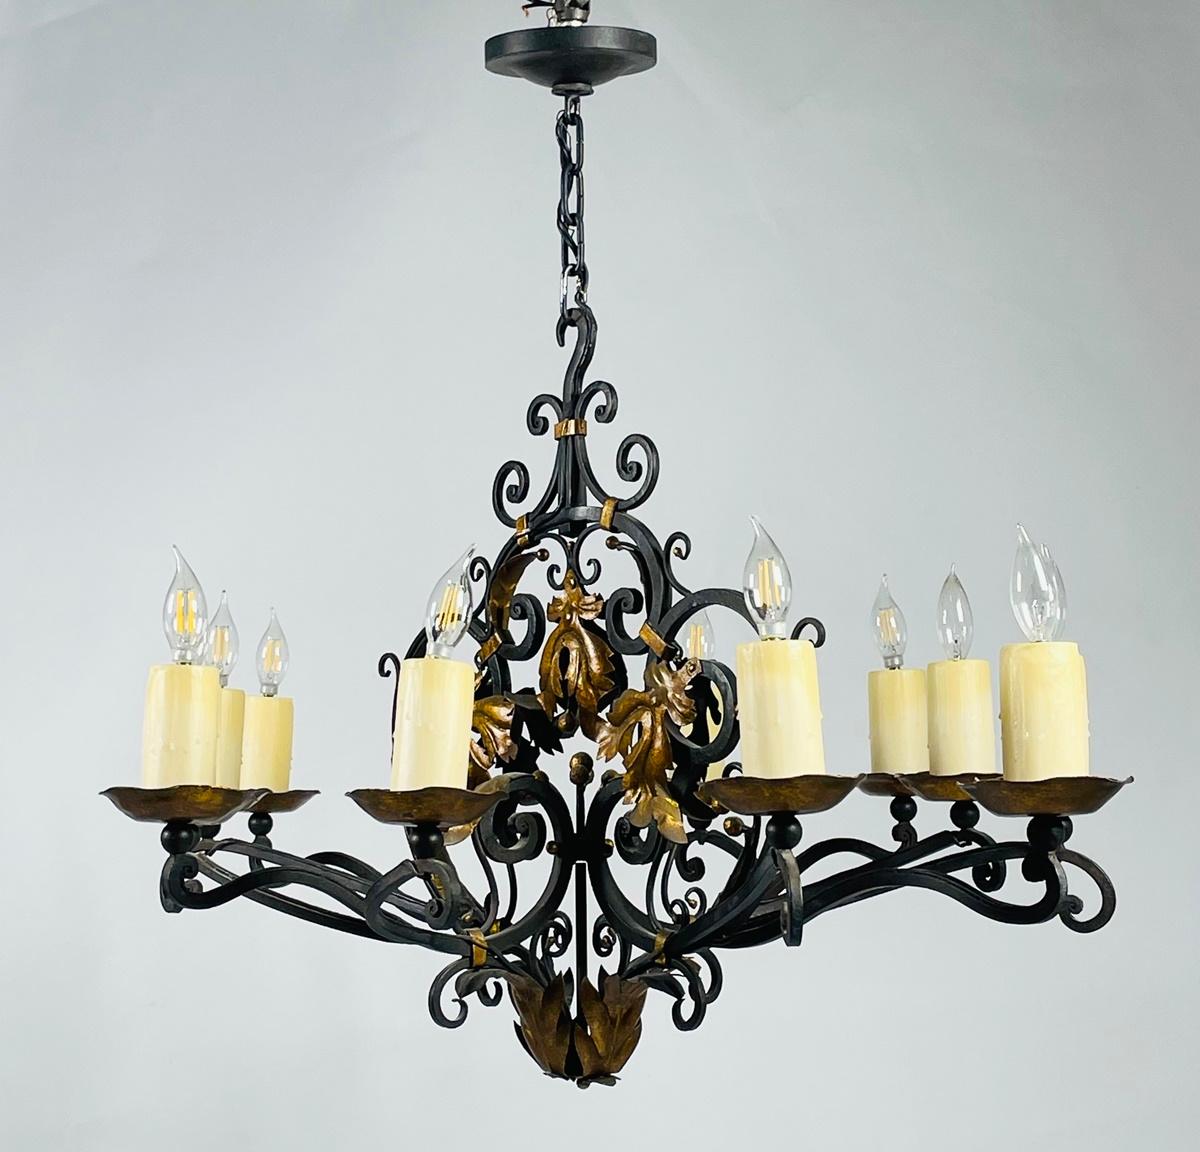 Modern Wrought Iron & Gold Gilt Chandelier by Paul Ferrante, USA 2016 For Sale